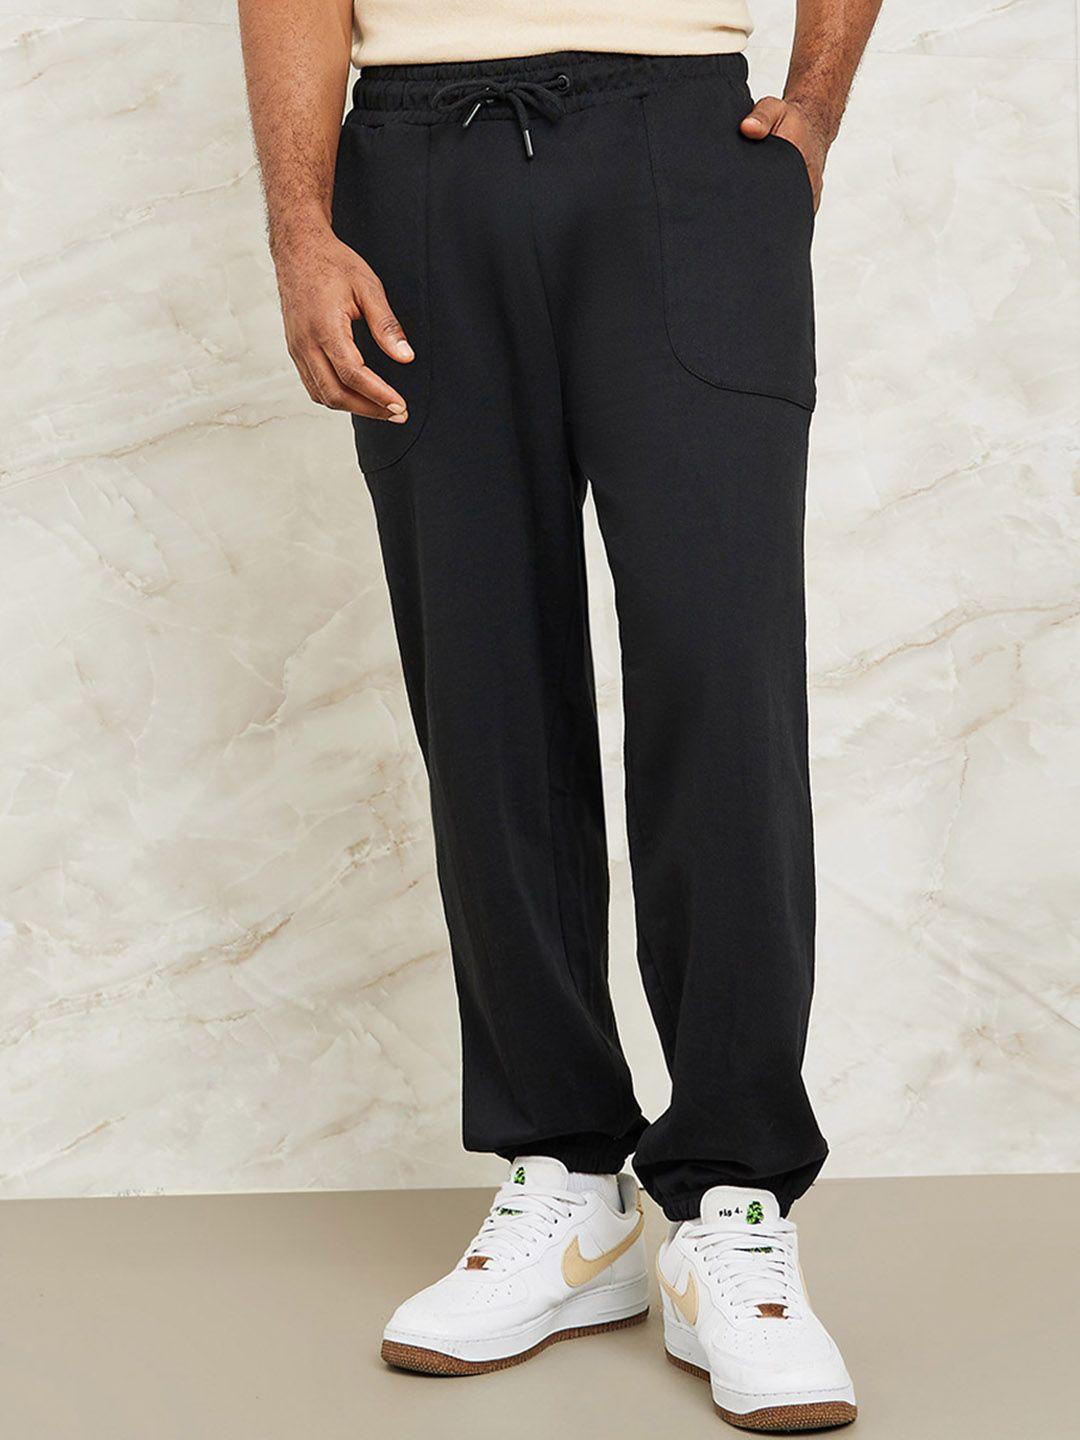 styli-men-relaxed-fit-eco-earth-oversized-mid-rid-joggers